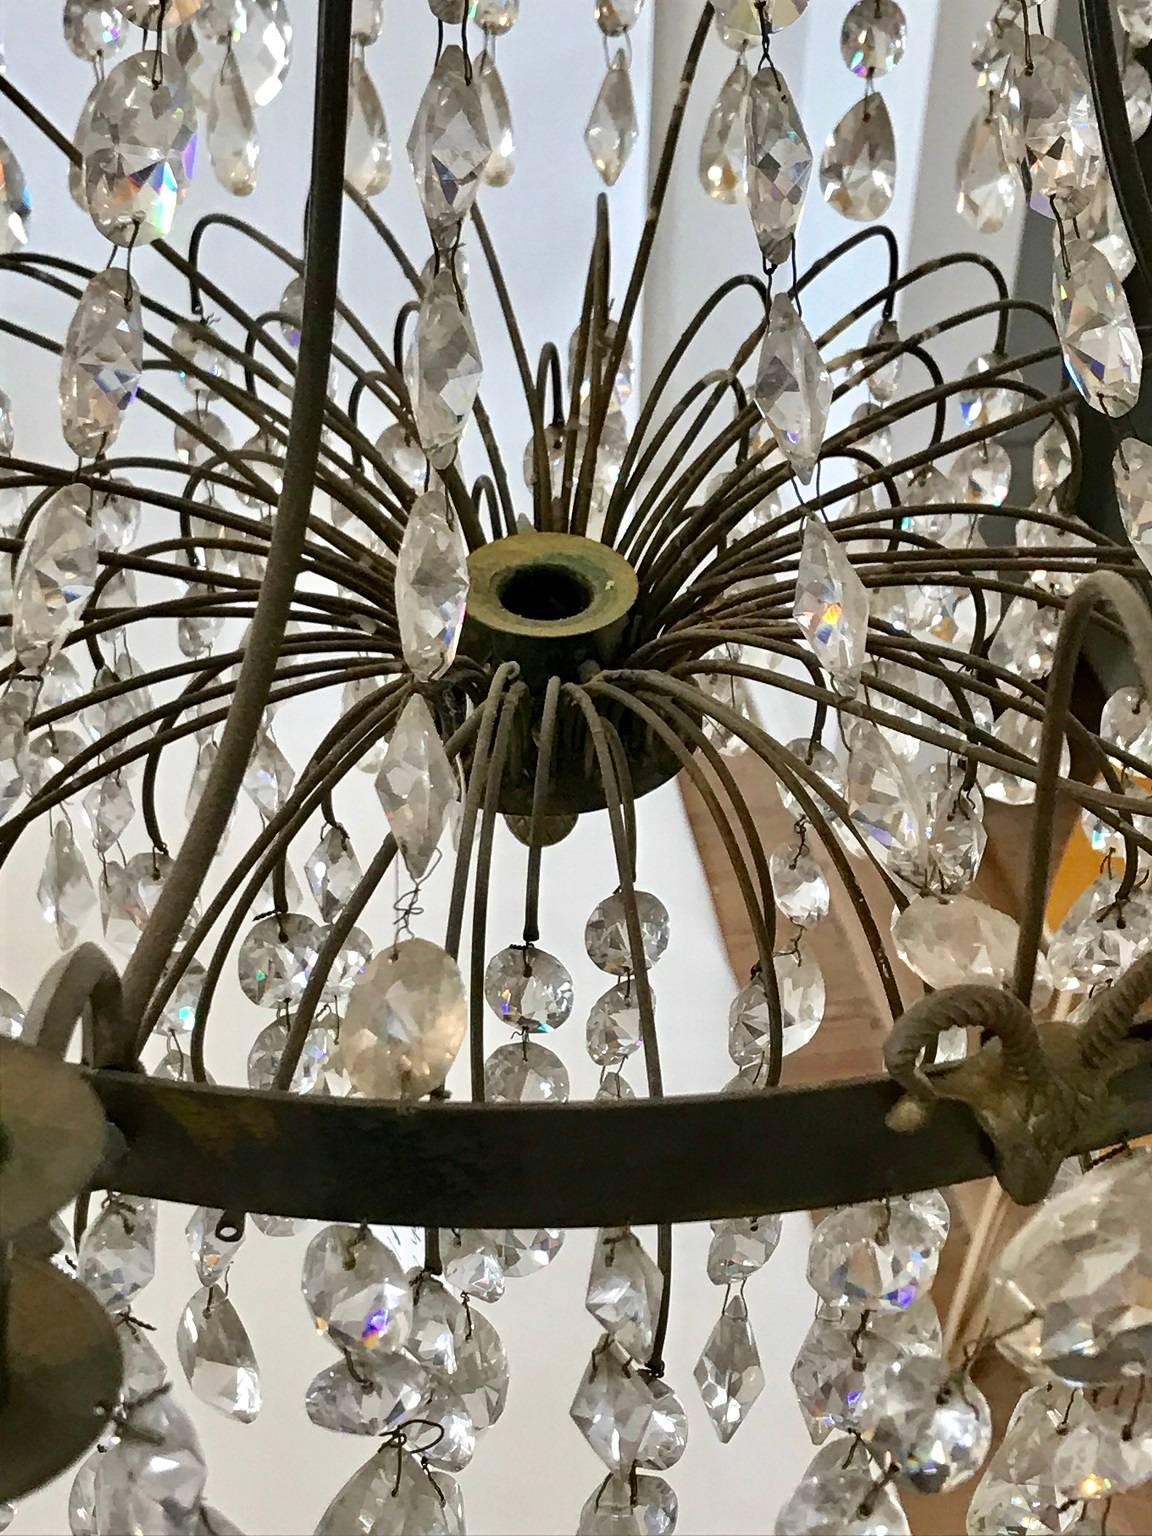 Delicate early 19th century crystal chandelier of basket-form; eight scrolling arms to support candles, with another candle holder at the center bottom of the basket; gilt bronze armature; two later small electric light fittings at the top ring of